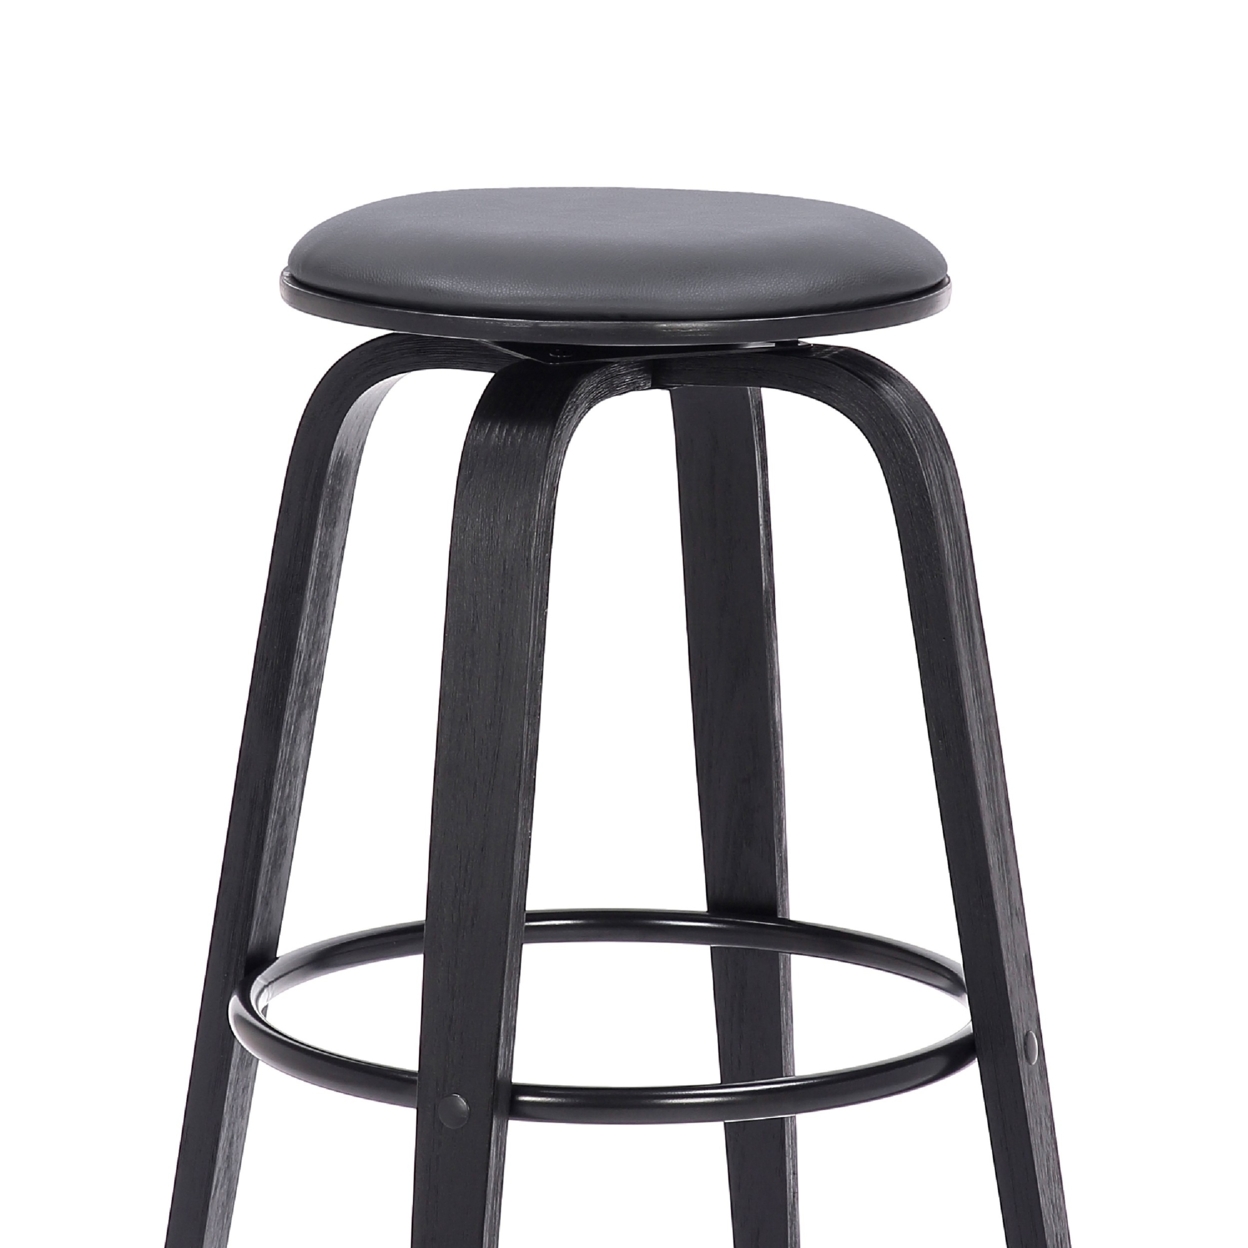 Backless Barstool With Swivel Seat And Wooden Legs, Gray- Saltoro Sherpi